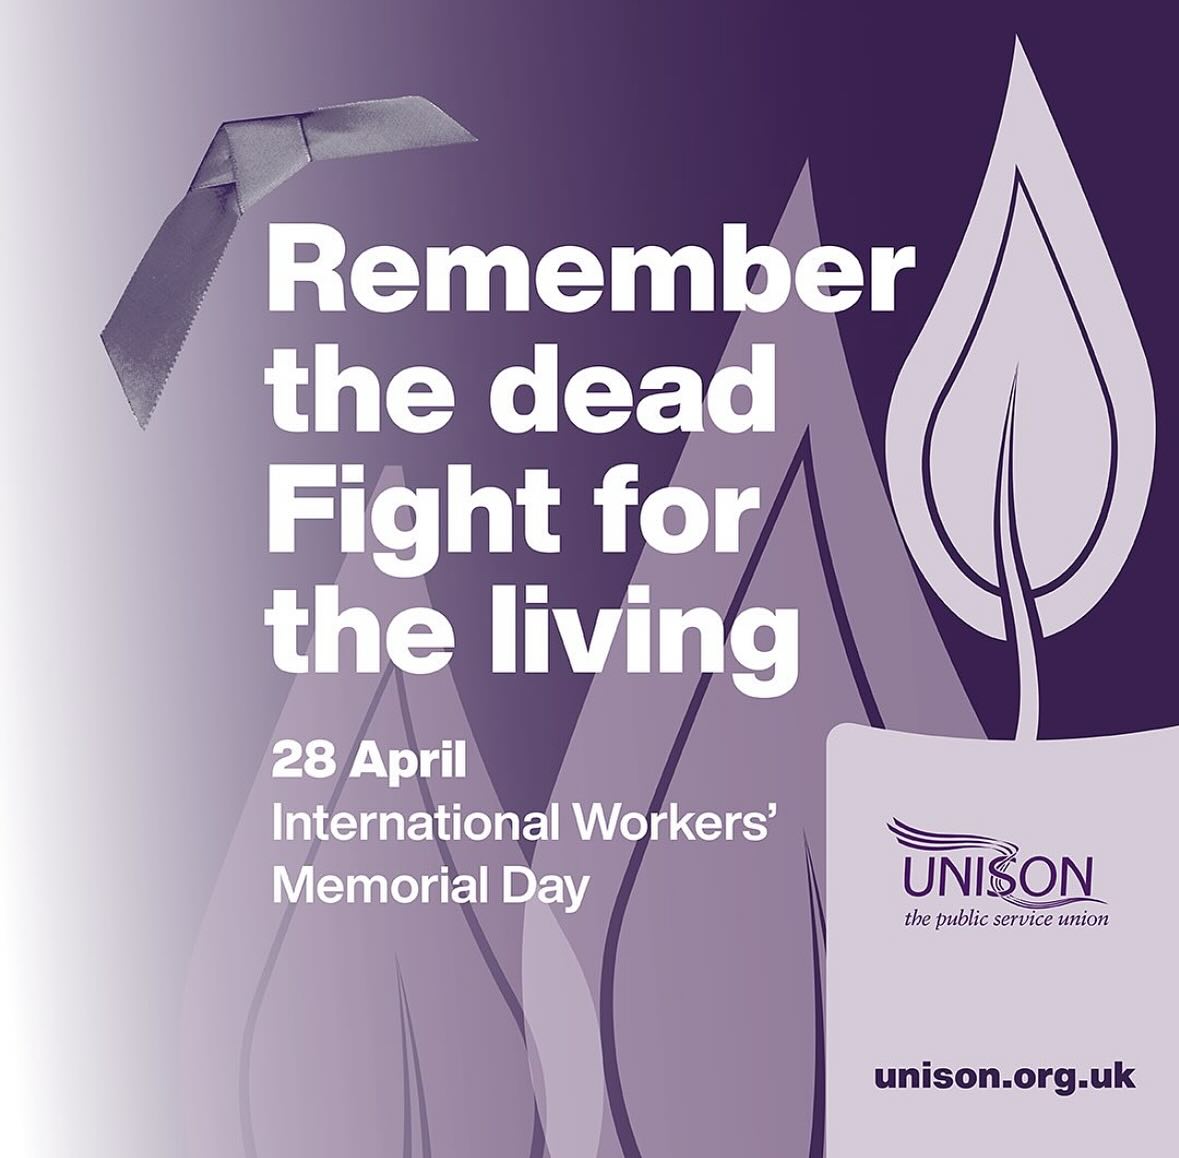 Every International Workers Memorial Day we affirm a simple principle: no worker should die just doing their job. We mourn each and every life lost because of hazardous workplaces, dangerous working conditions, and poor employment practices.